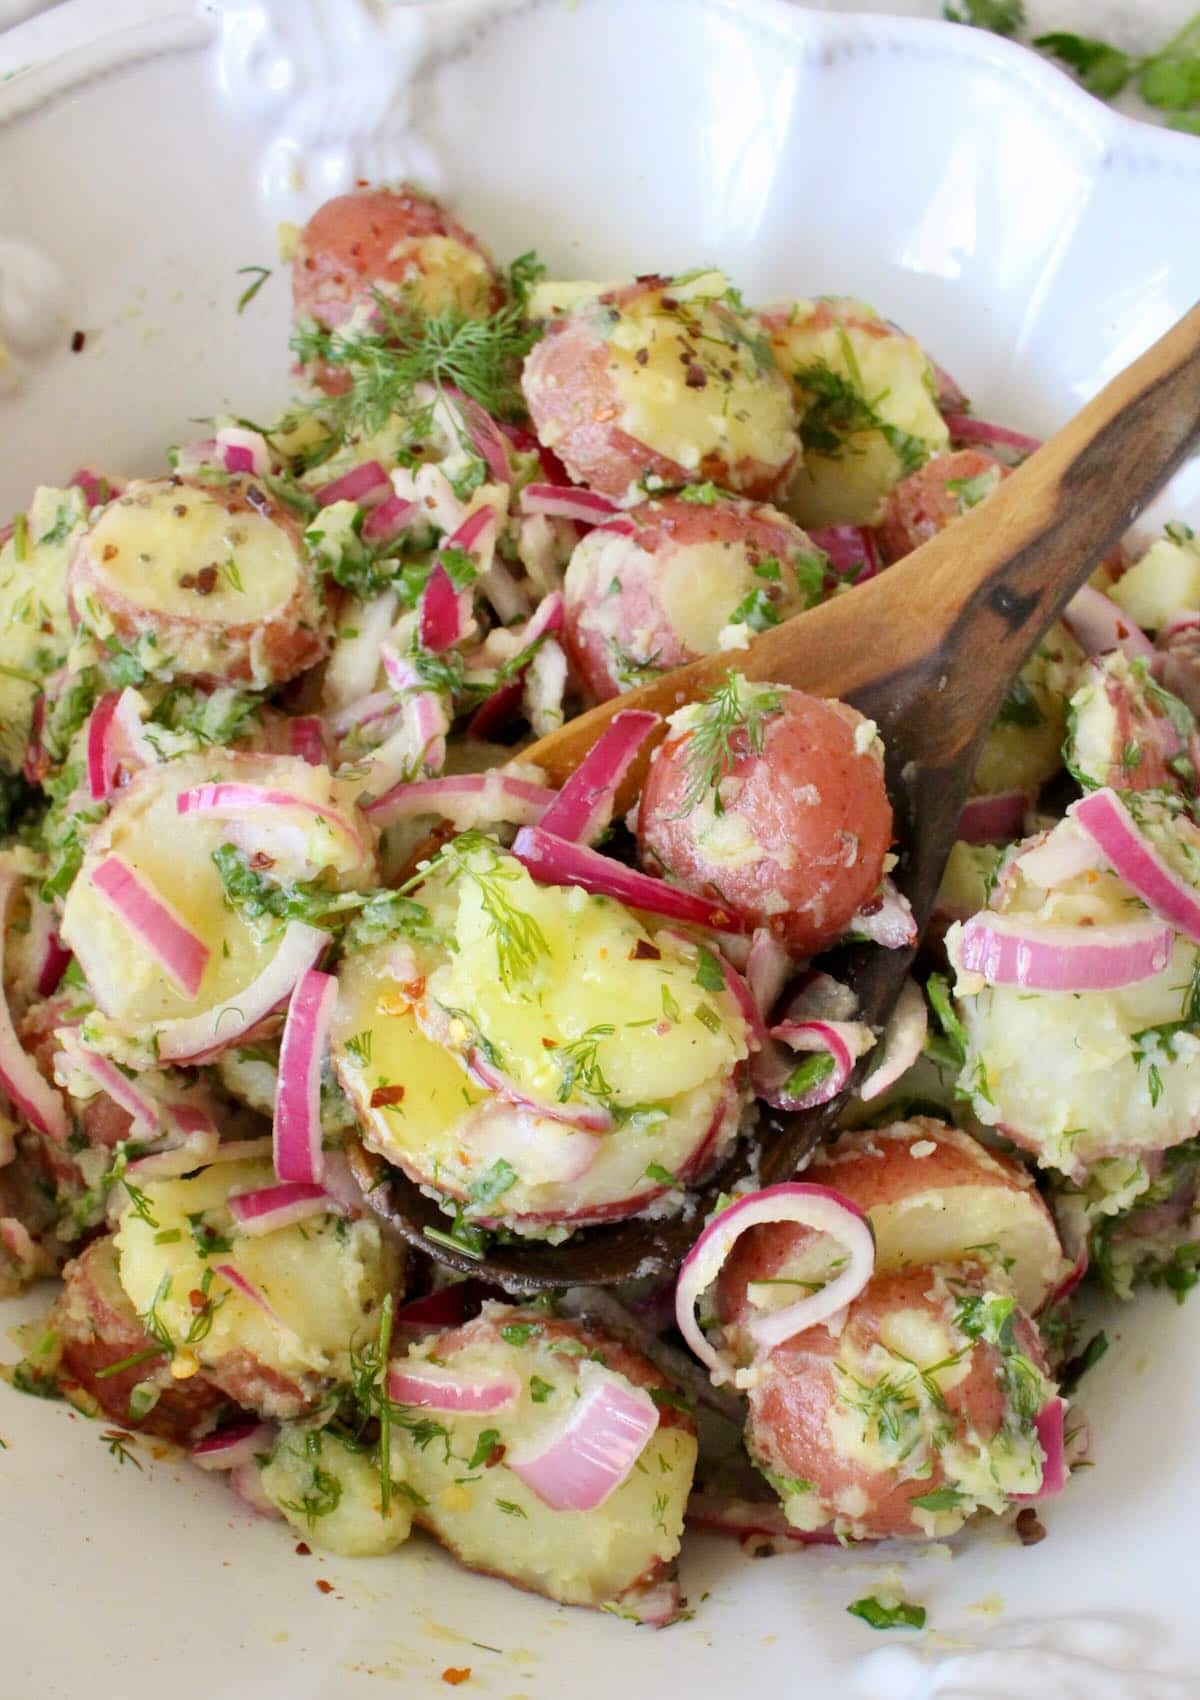 herbed warm potato salad with red potatoes